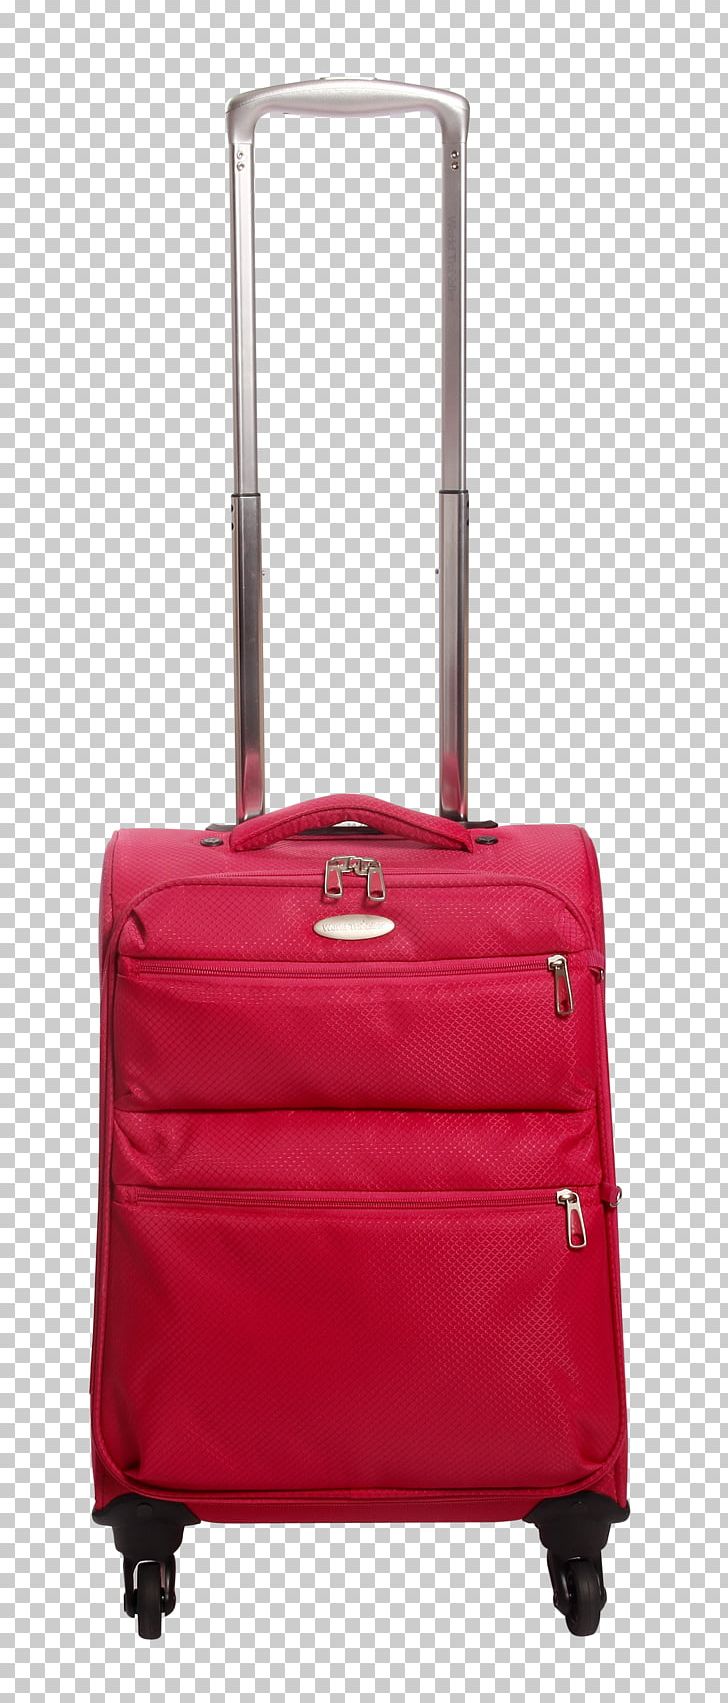 Baggage Hand Luggage Suitcase Trolley PNG, Clipart, Accessories, Backpack, Bag, Baggage, Checked Baggage Free PNG Download